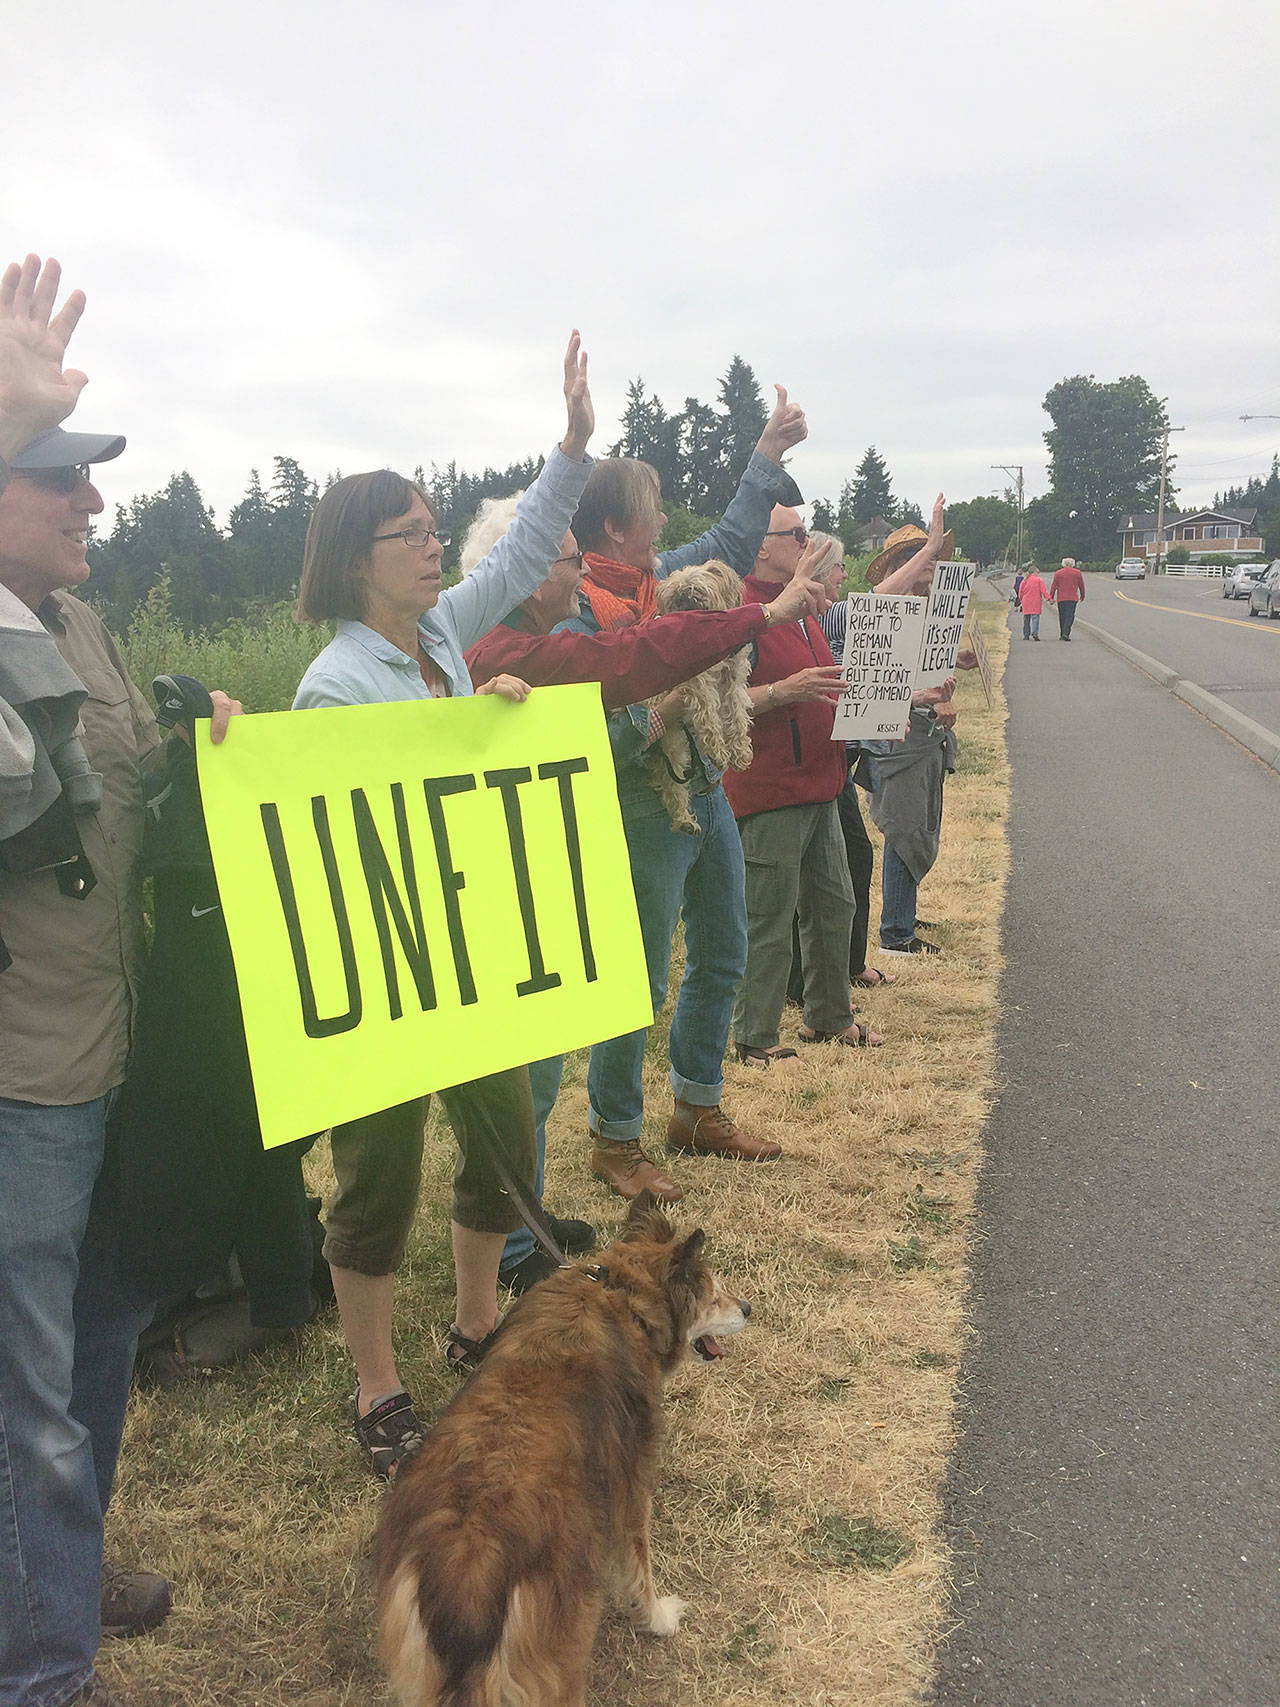 Evan Thompson / The Record — Around 40 people participated in a demonstration calling for President Donald Trump’s impeachment on Sunday along the sidewalk of Edgecliff Drive in Langley.